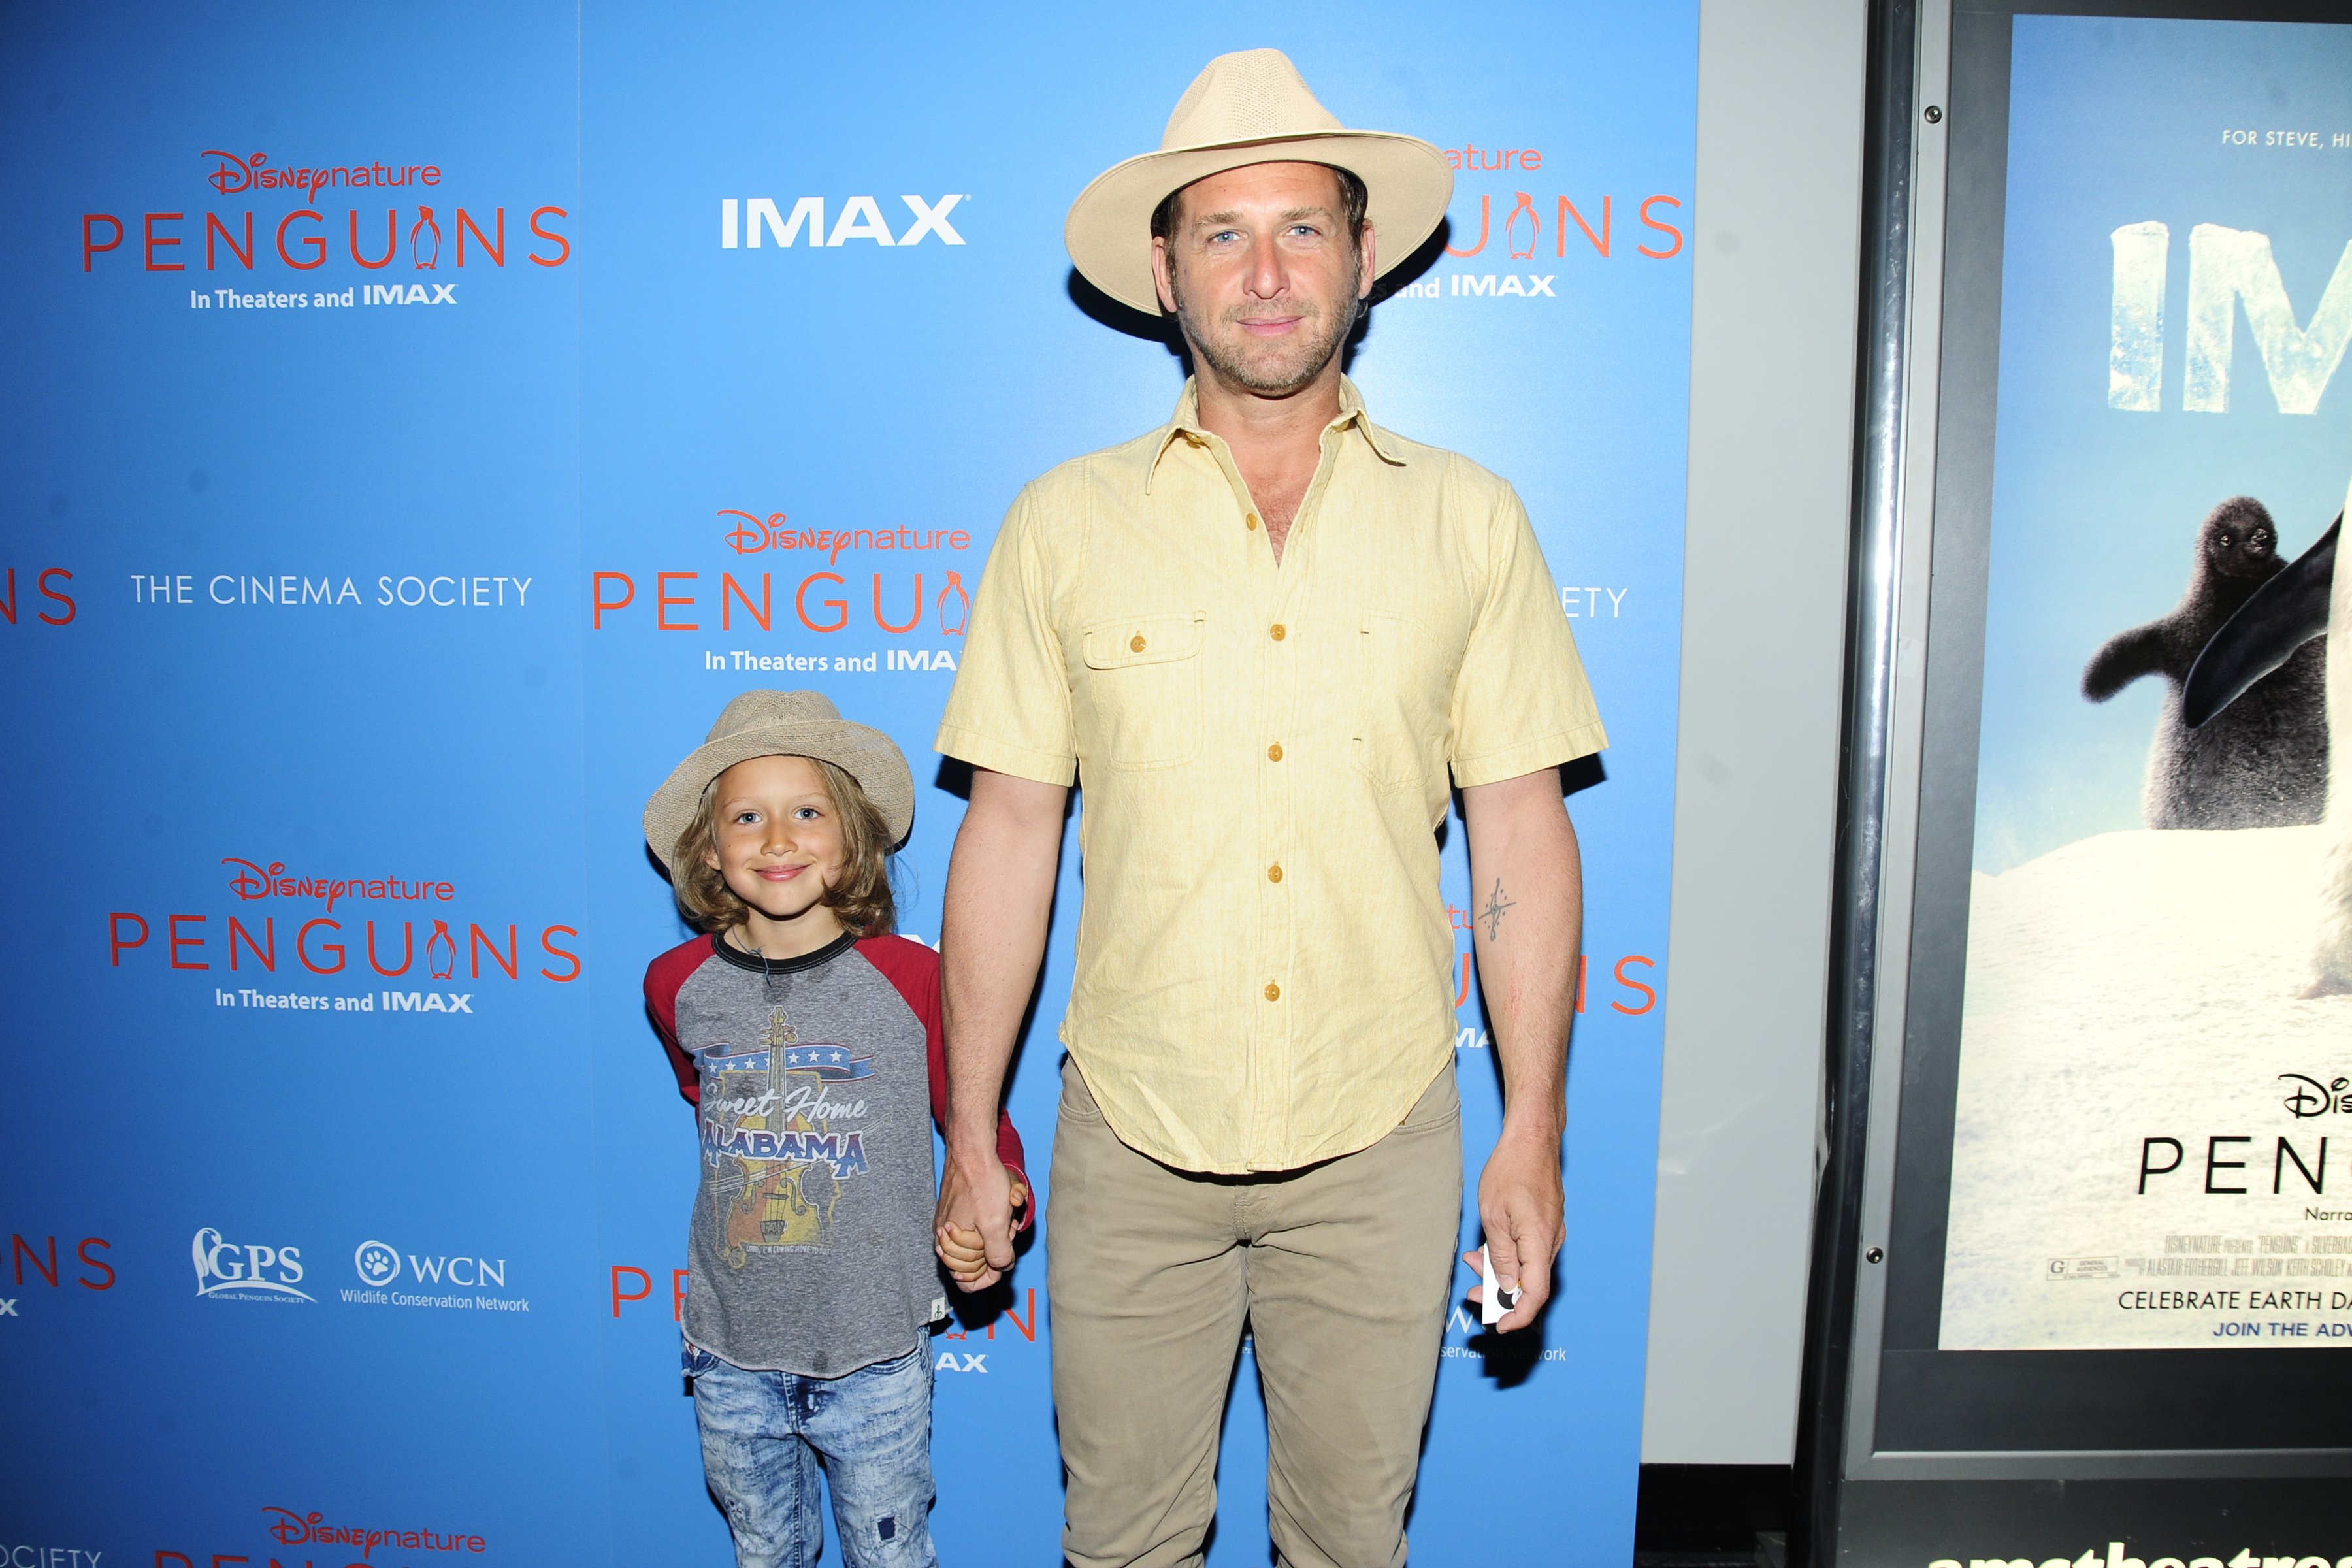 Noah Rev Maurer and his father, Josh Lucas, attend a special screening of "Penguins" hosted by Disneynature and The Cinema Society on April 14, 2019, in New York City. | Source: Getty Images